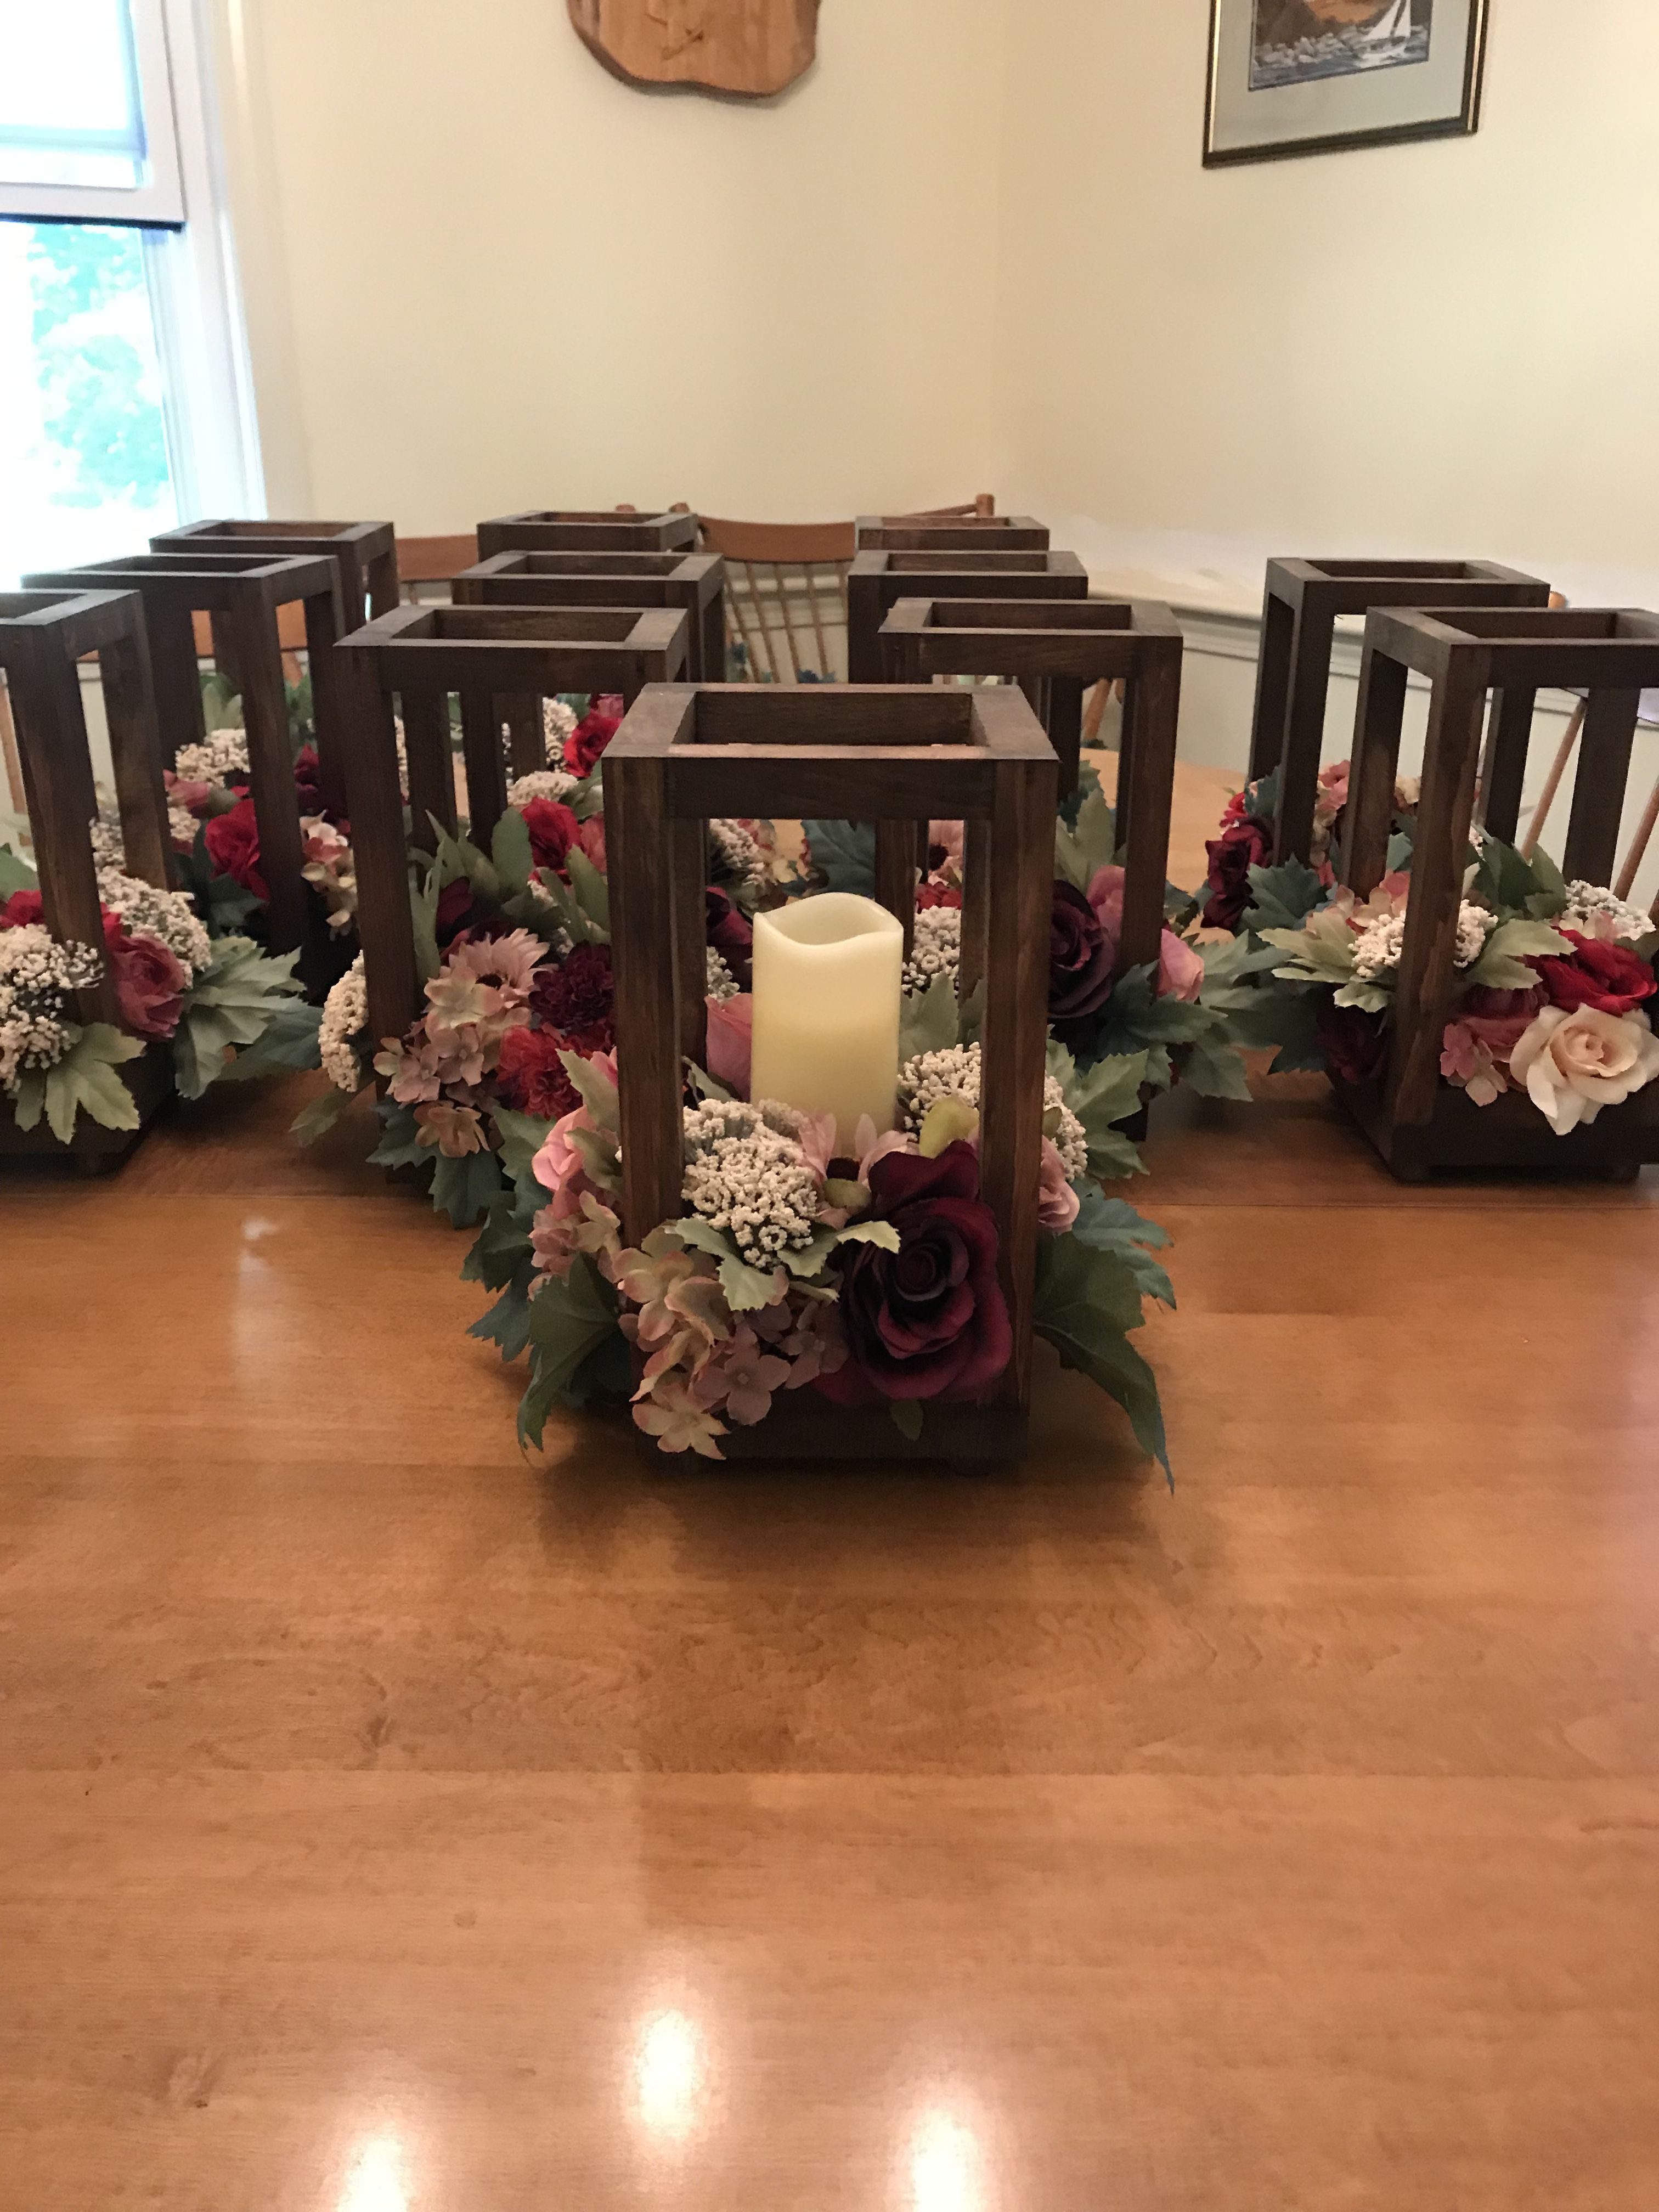 Wooden Lantern Centerpiece With Flameless Candles | Decorations | Size  | Only $190.00 - Wooden Lantern Centerpiece With Flameless Candles | Decorations | Size  | Only $190.00 -   15 diy Table centerpieces ideas